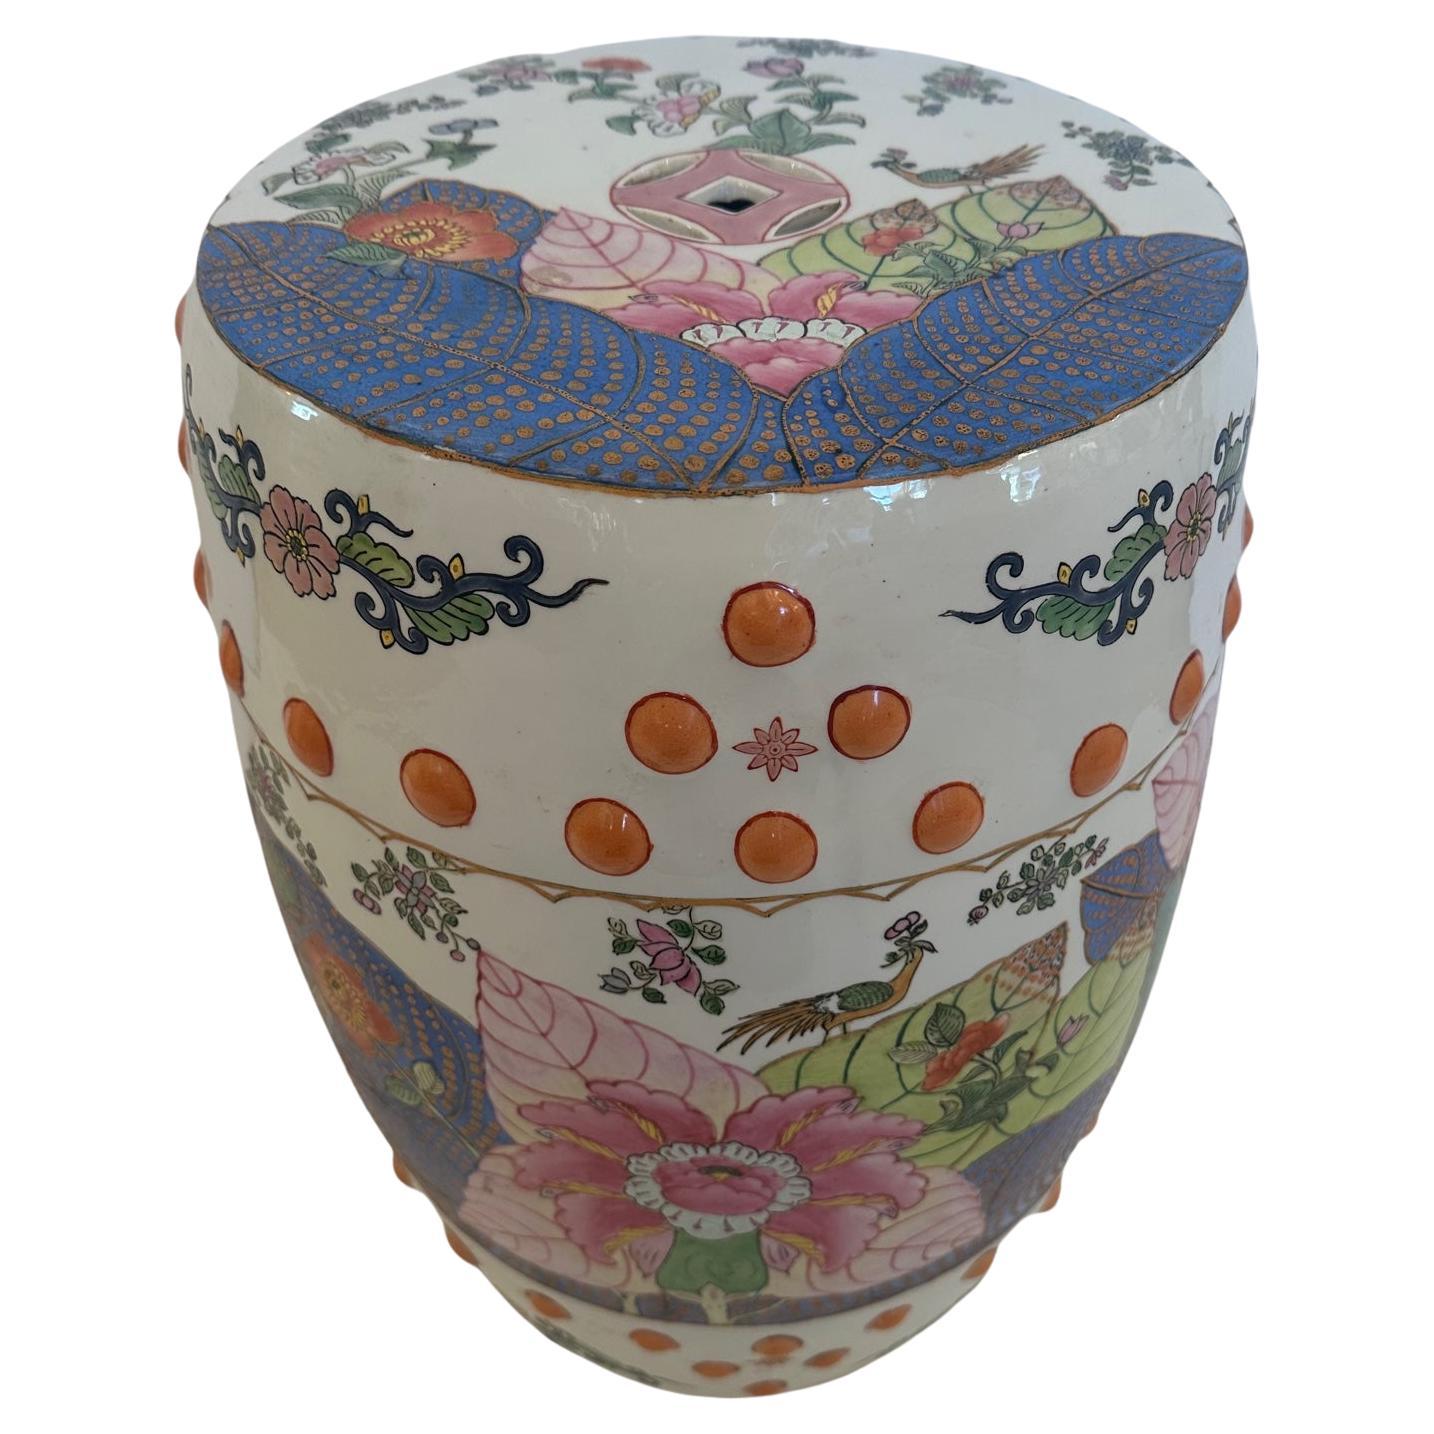 Chinese Garden Seat End Table in Beautiful Colors